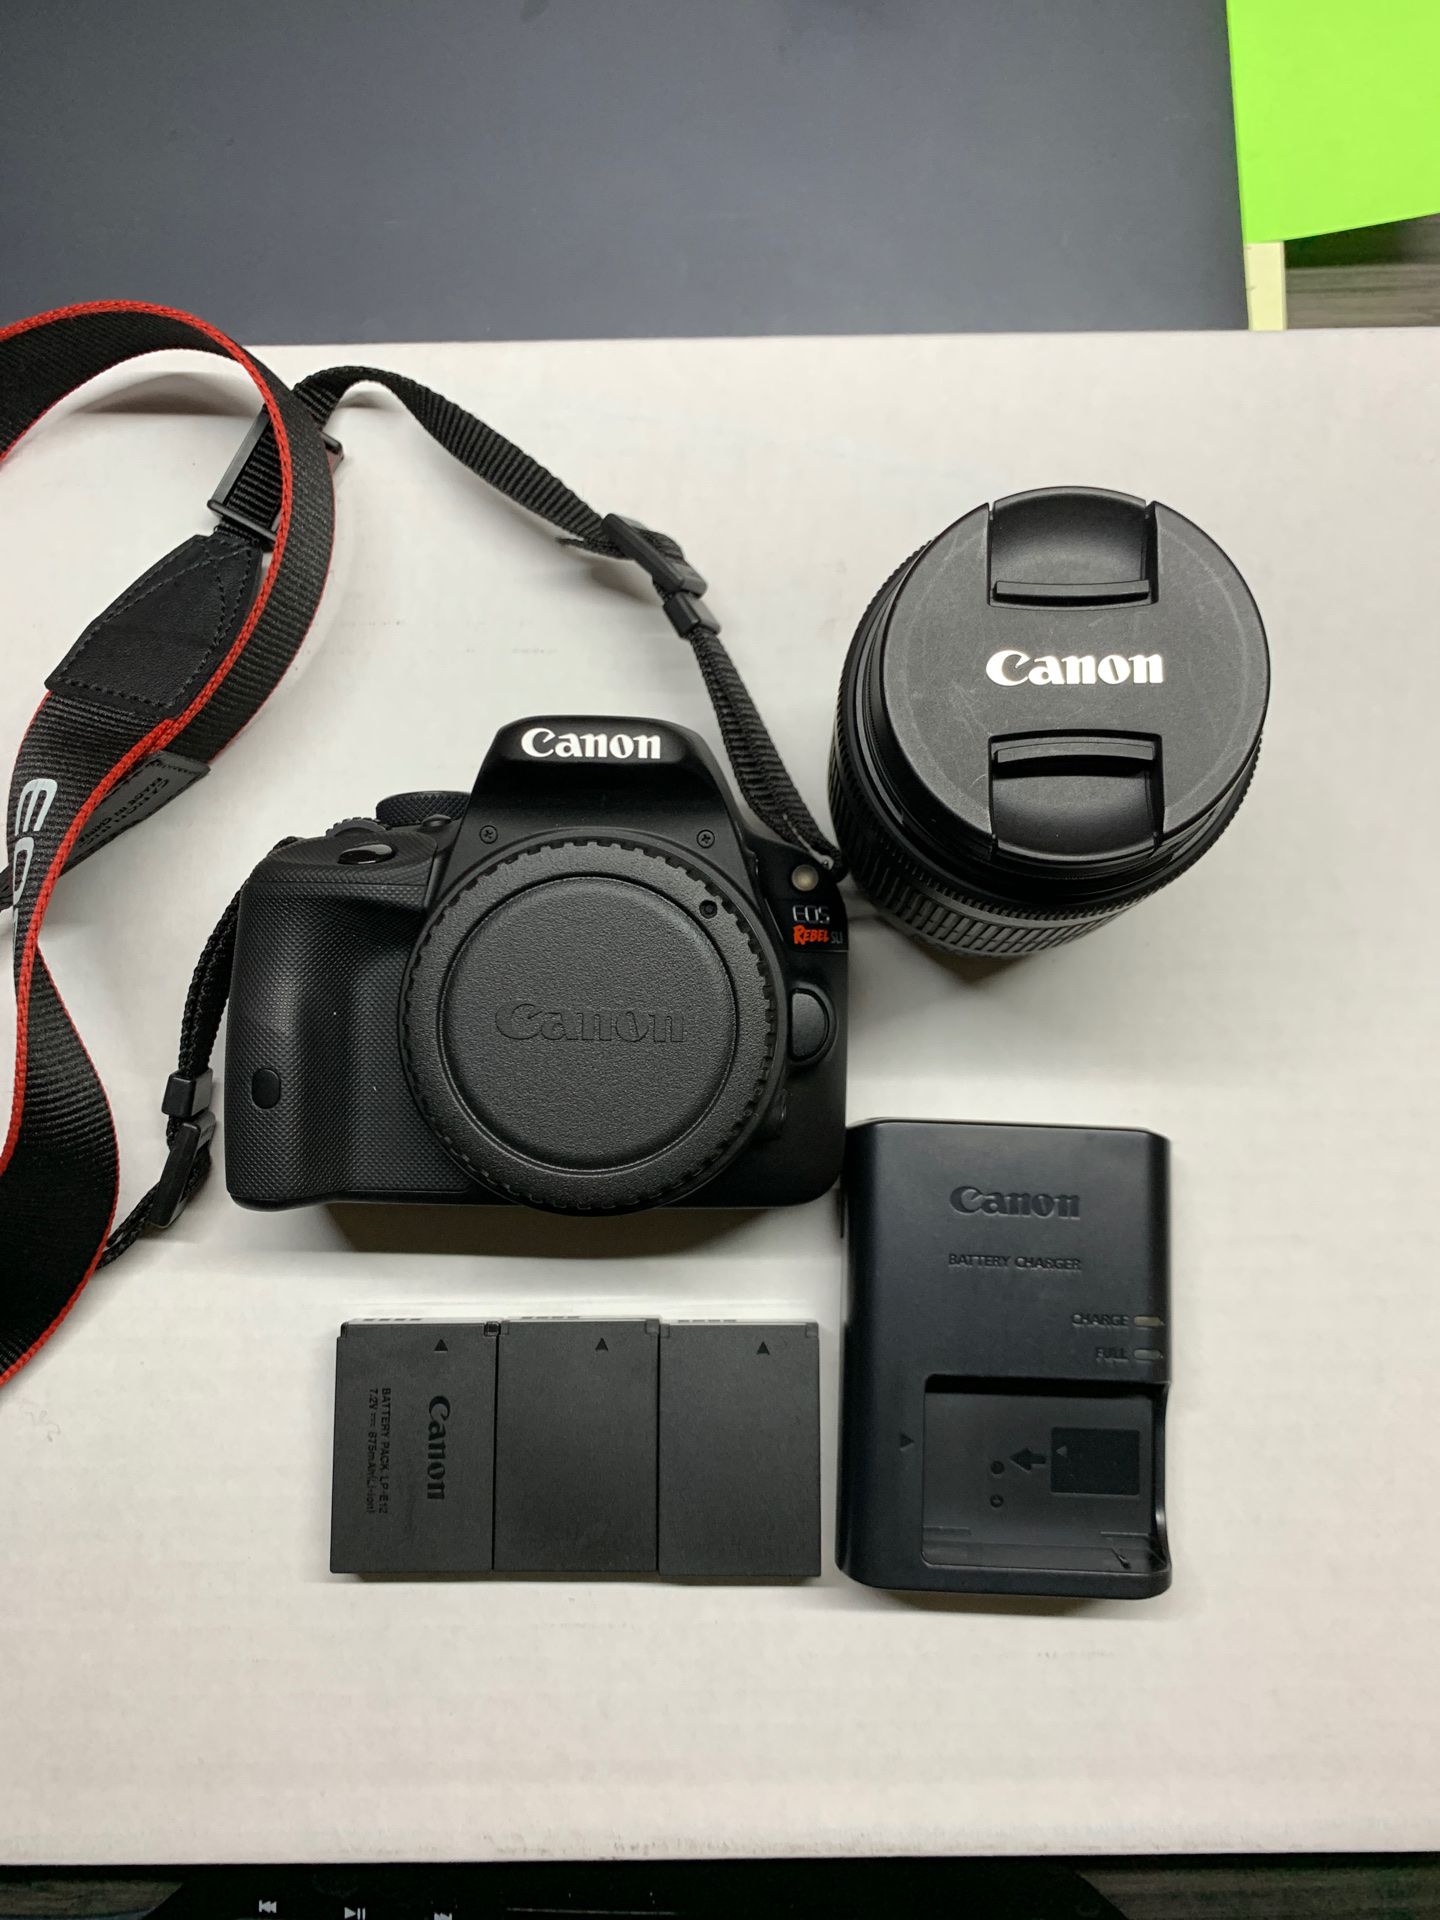 Canon EOS Rebel SL1 with 18-55mm IS STM lens